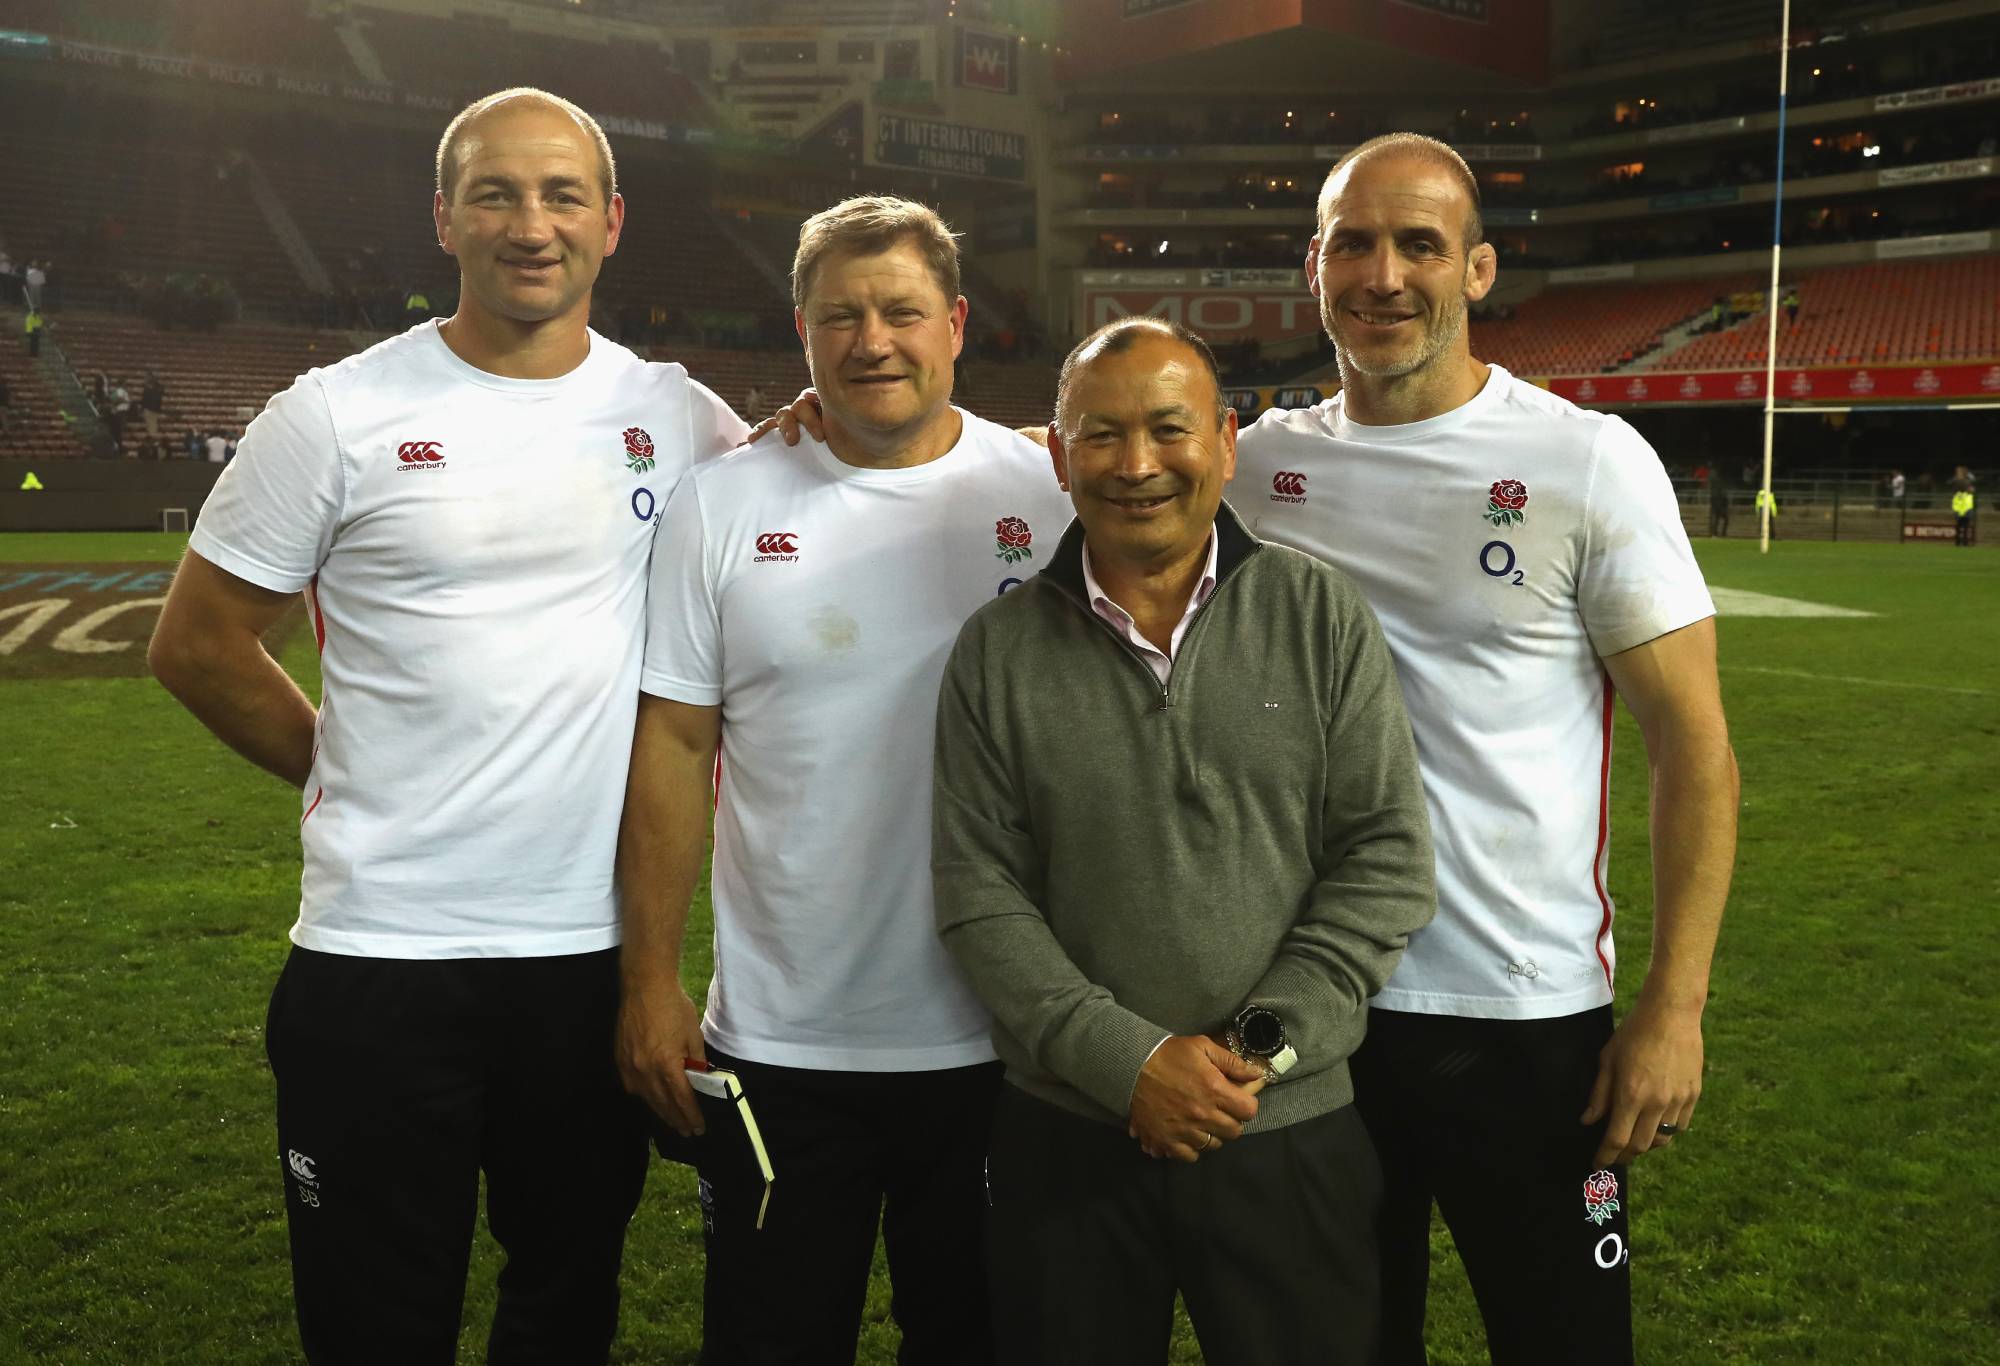 England coaches Steve Borthwick, forwards coach, Neil Hatley, scrum coach, head coach Eddie Jones and Paul Gustard, defensive team after their win during the third test match between South Africa and England at Newlands Stadium on June 23, 2018.  in Cape Town, South Africa.  (Photo by David Rogers/Getty Images)